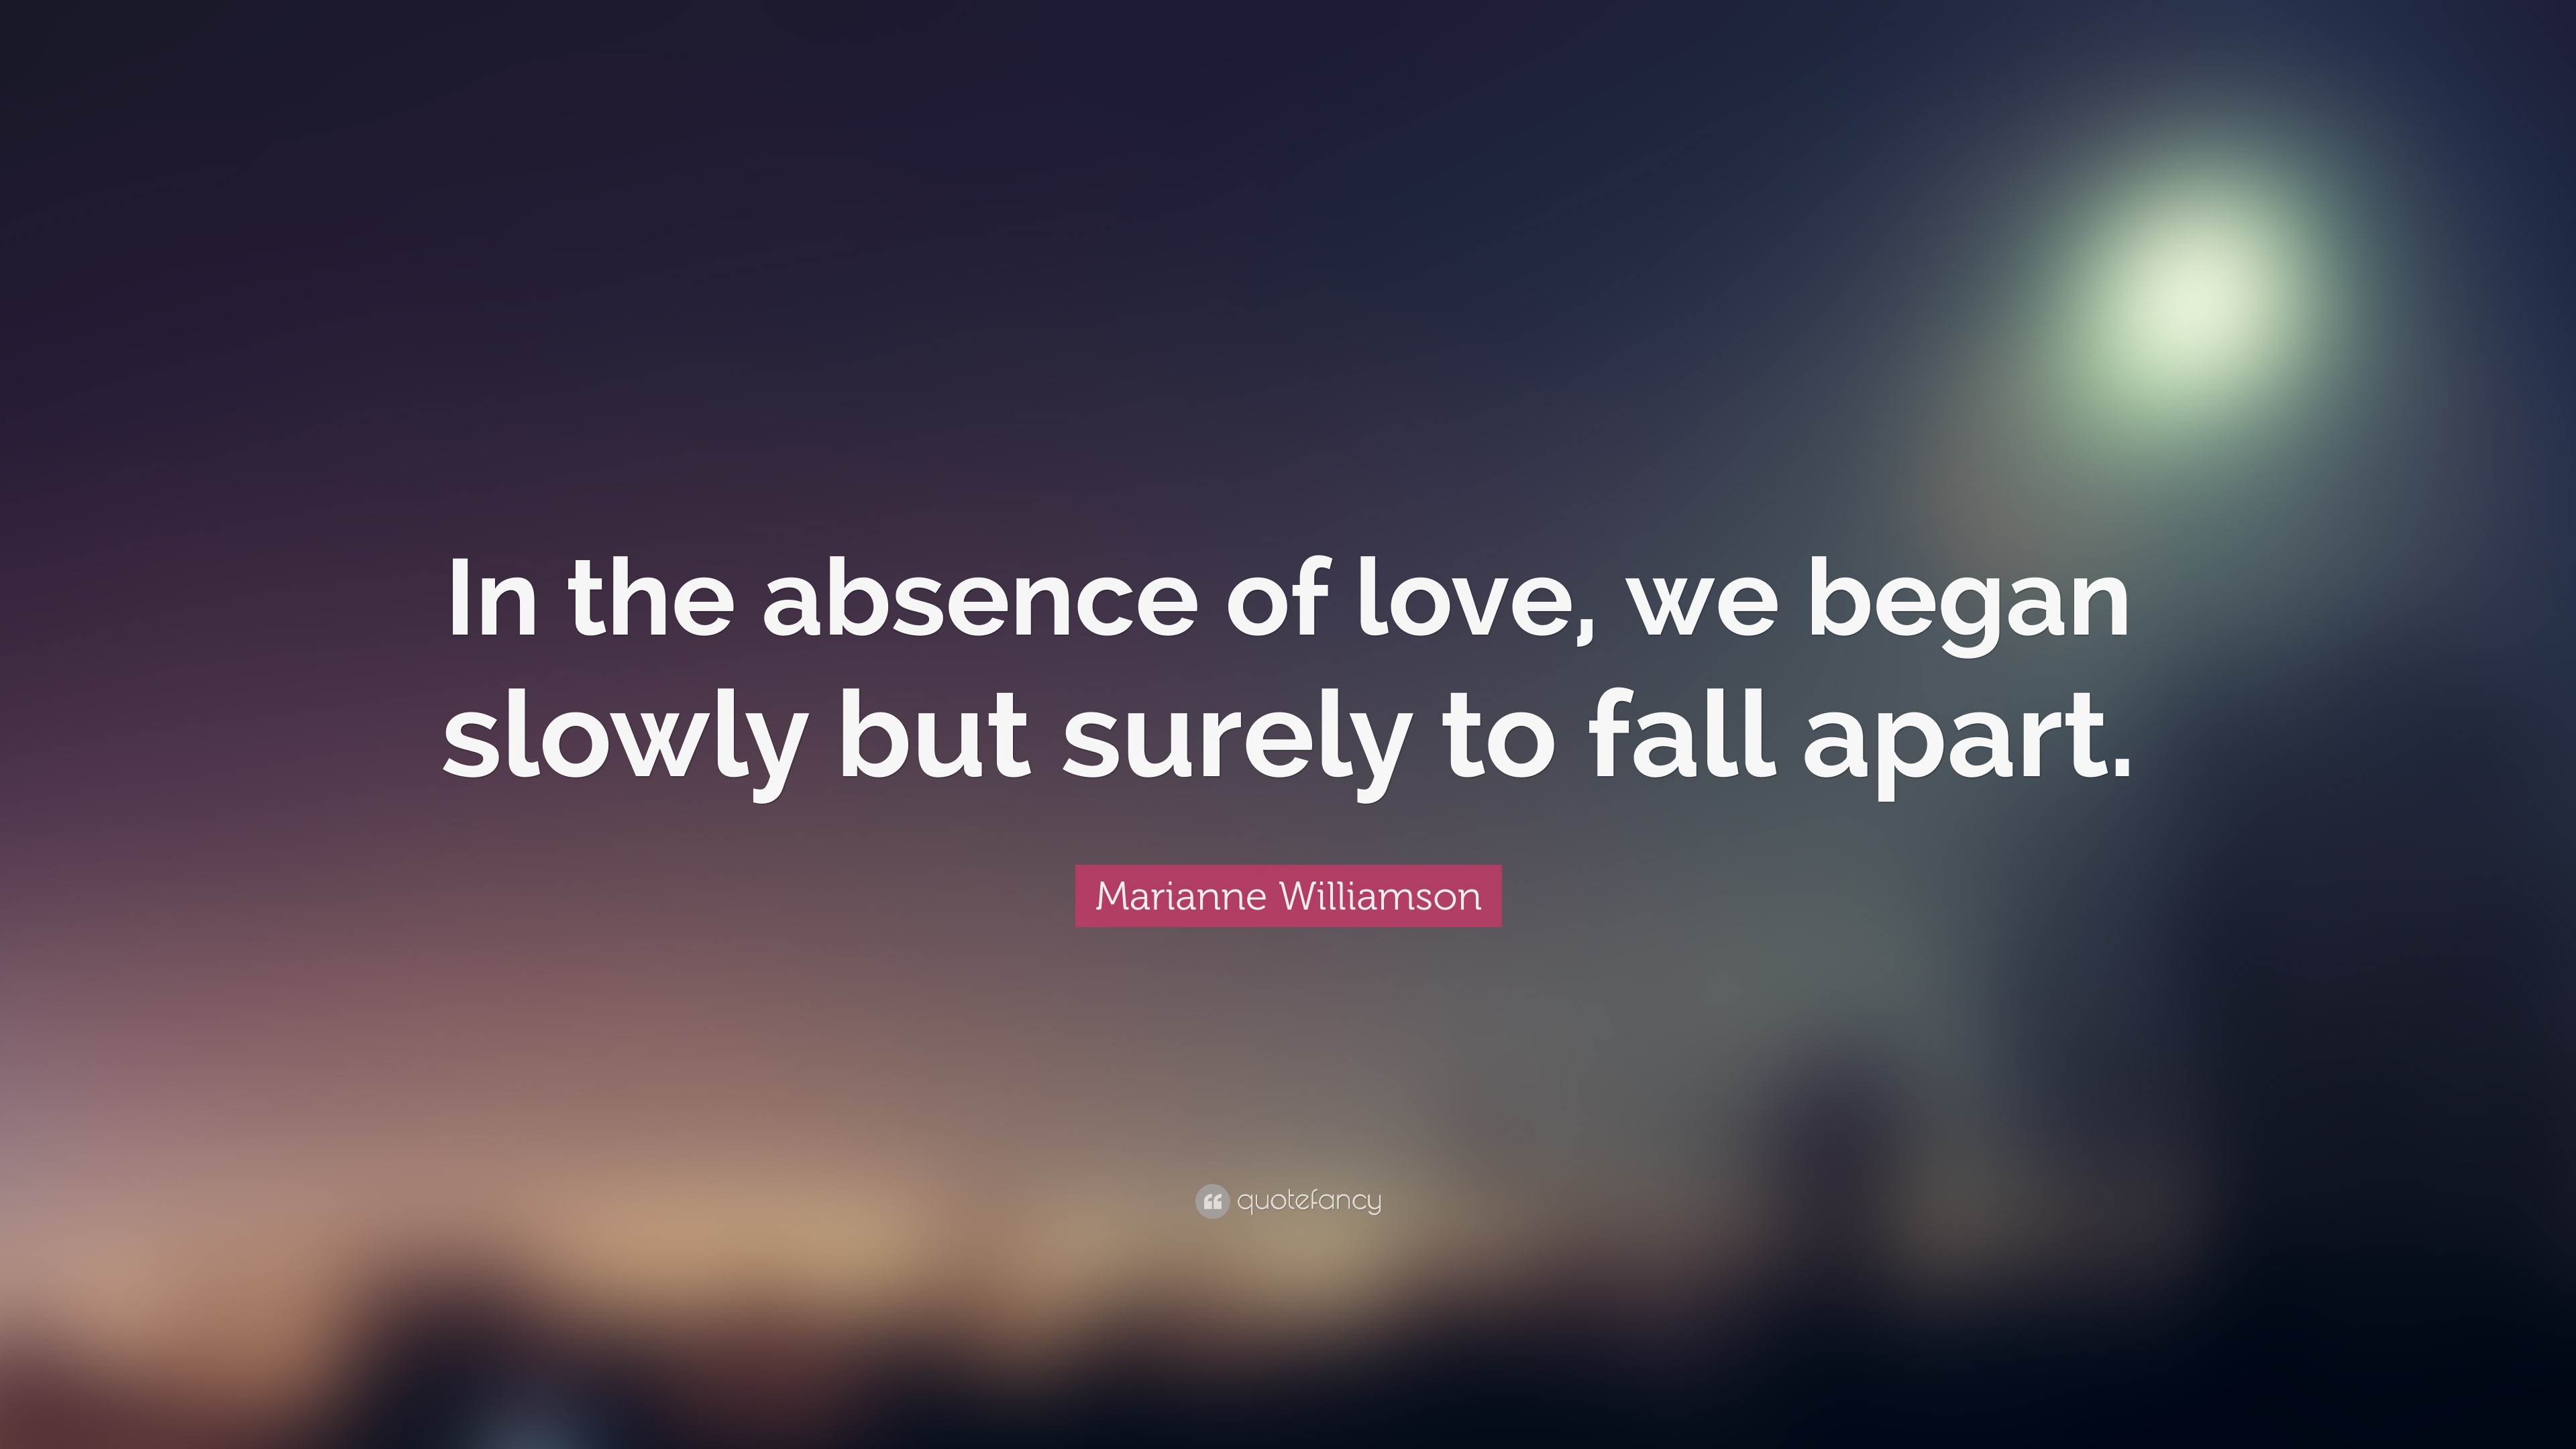 Marianne Williamson Quote In The Absence Of Love We Began Slowly But Surely To Fall Apart